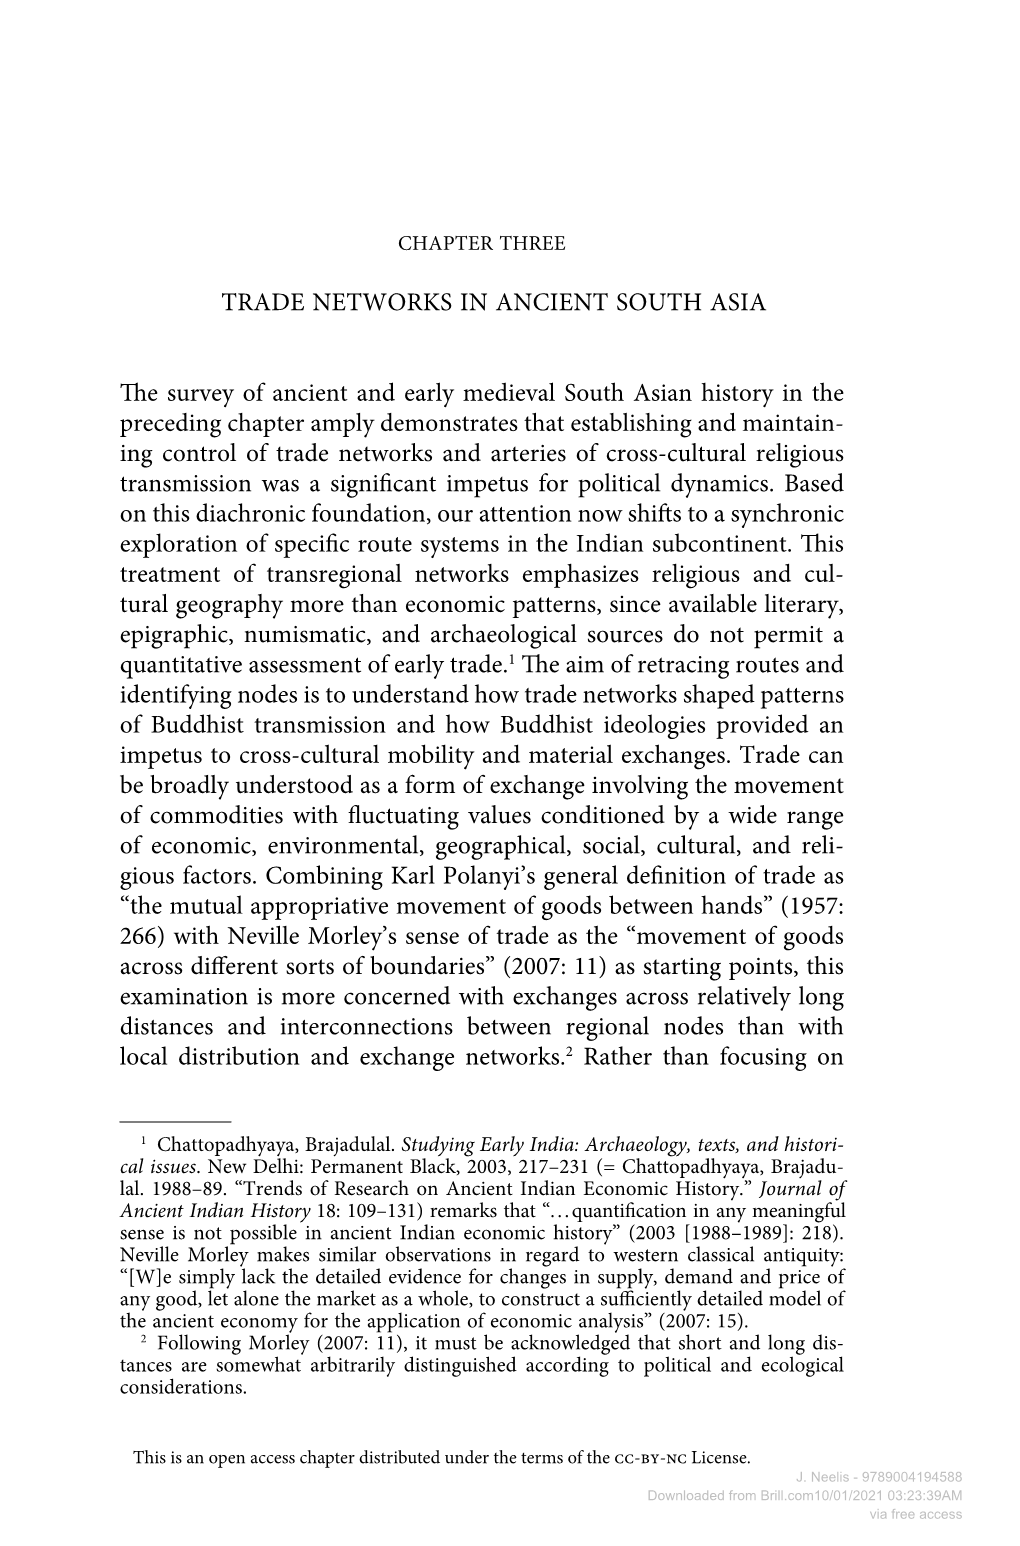 Trade Networks in Ancient South Asia